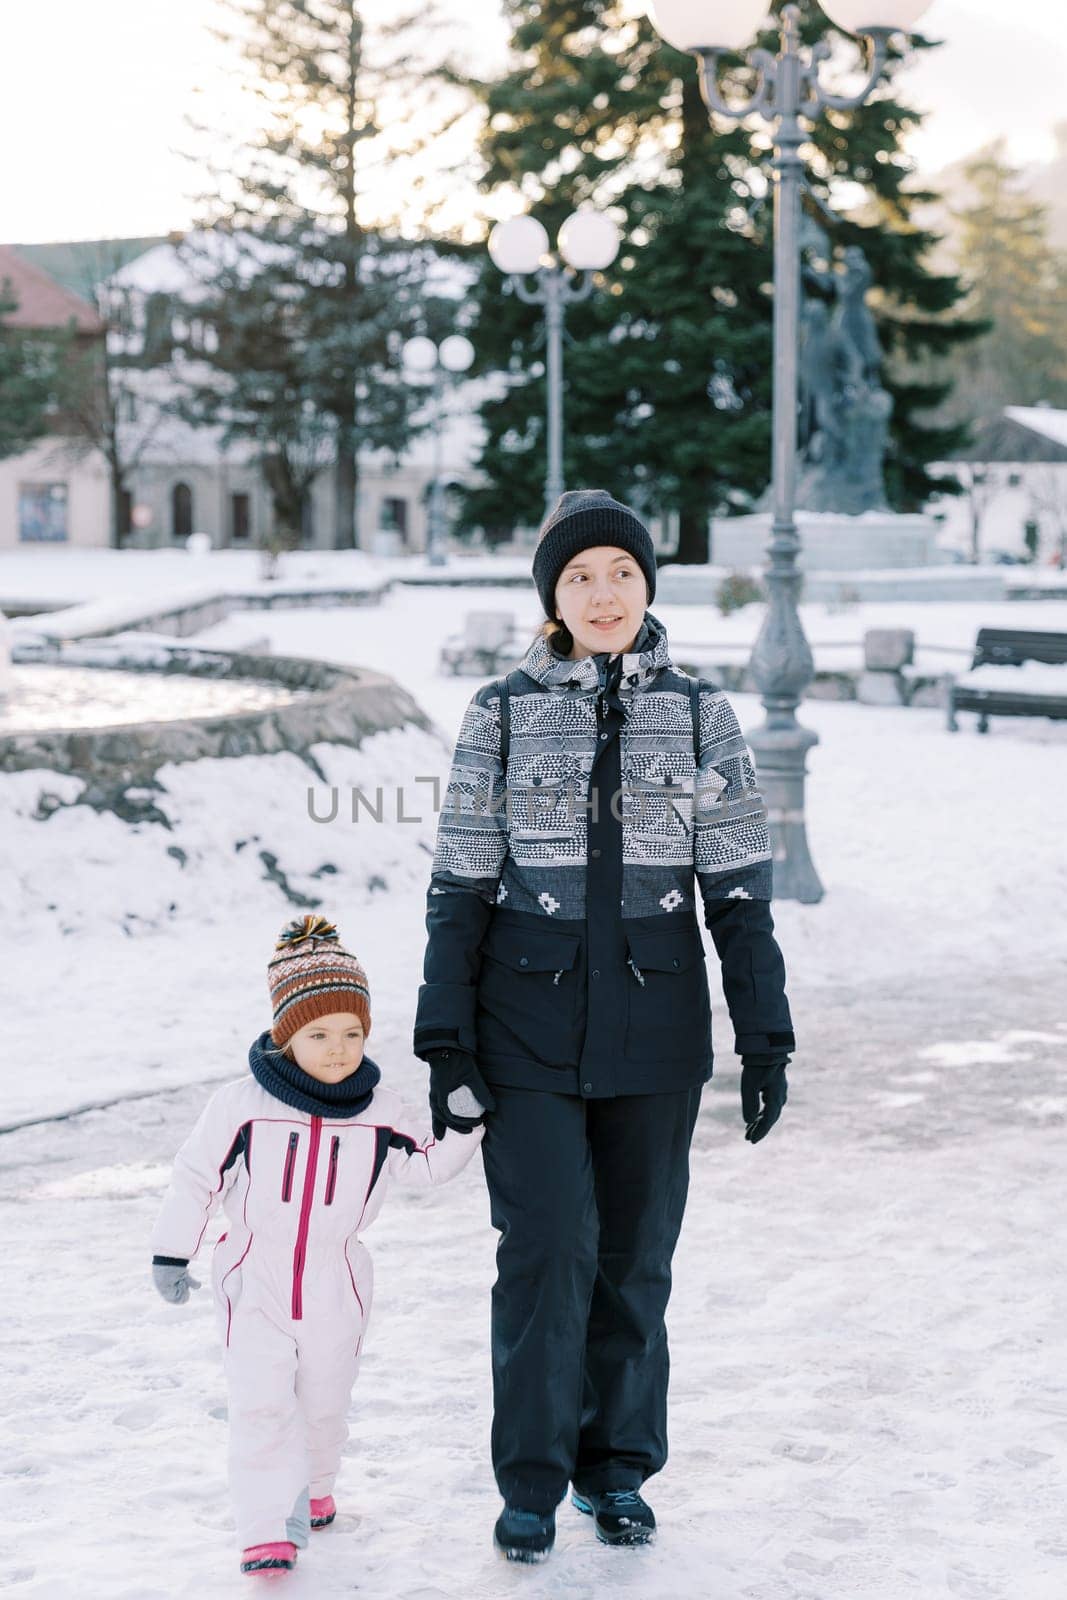 Mom and little girl walk holding hands through a snowy park by Nadtochiy